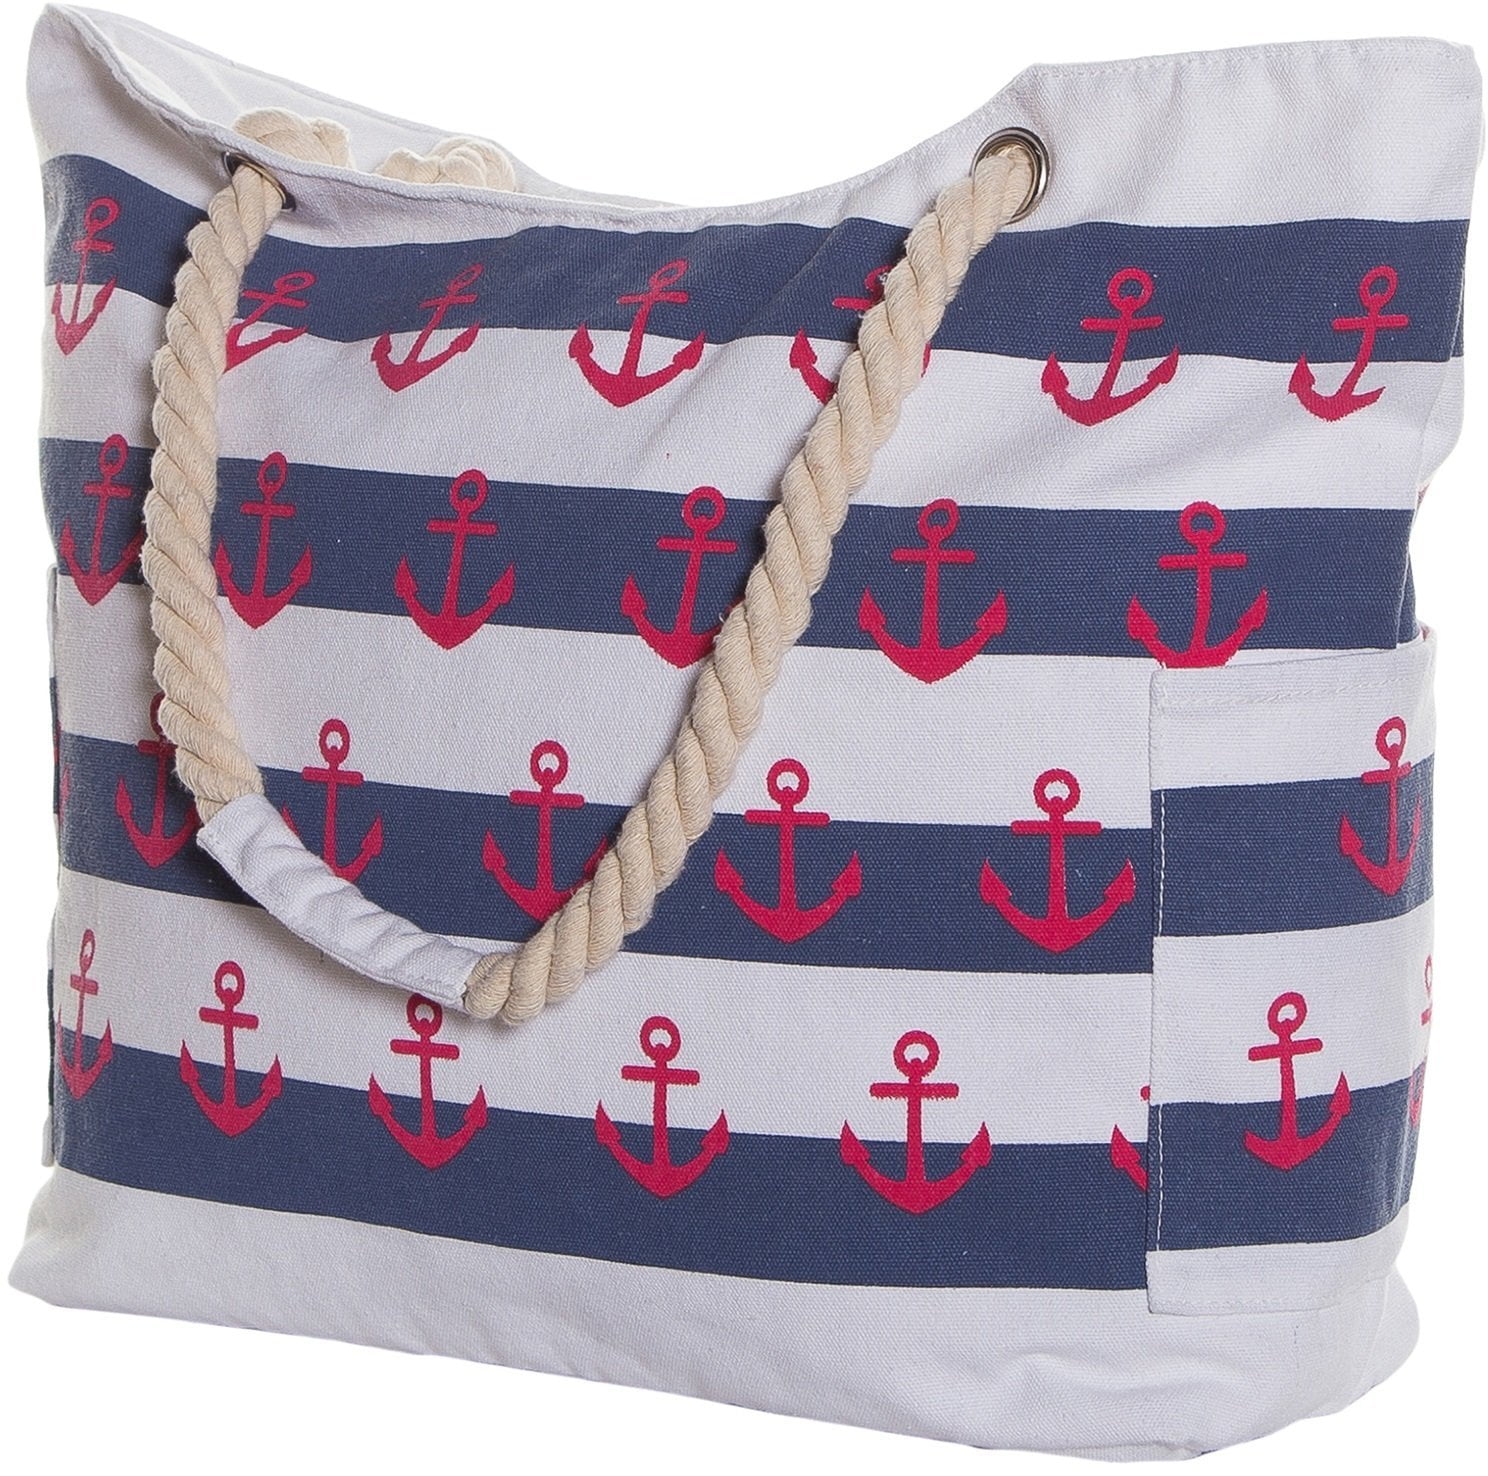 large beach bag with pockets